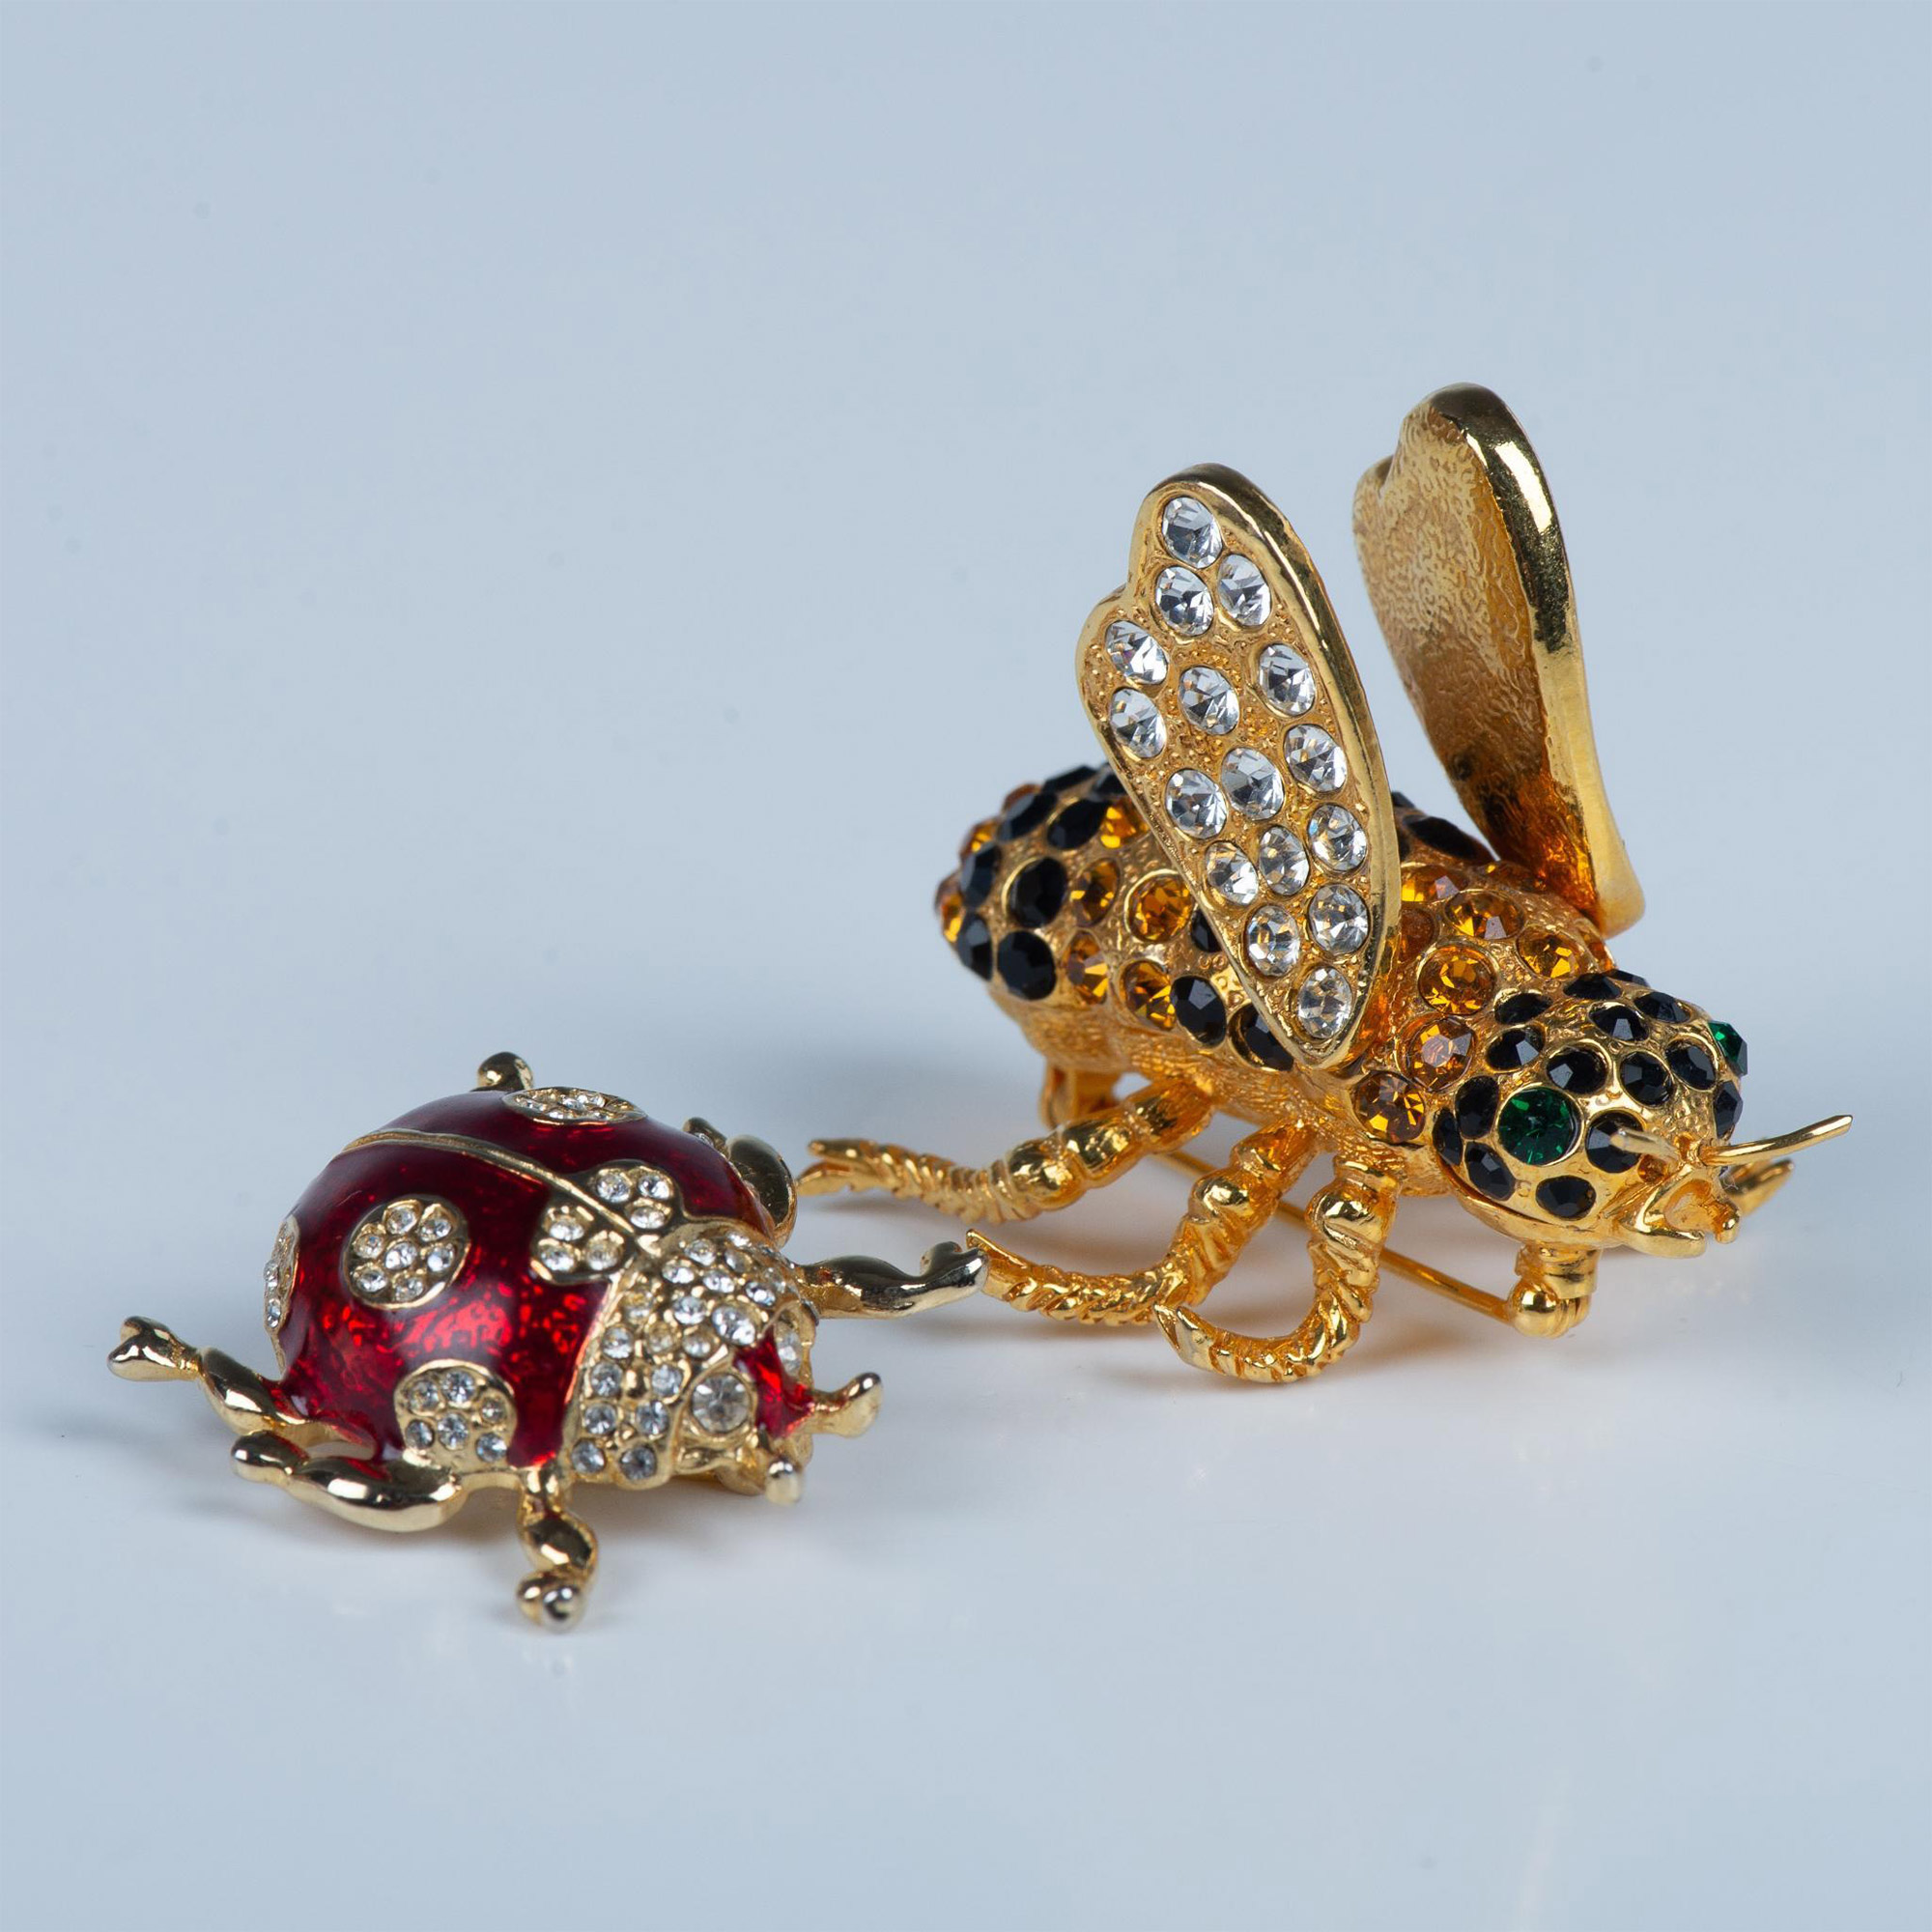 2pc Naturalistic 3D Bumblebee & Ladybug Insect Brooches